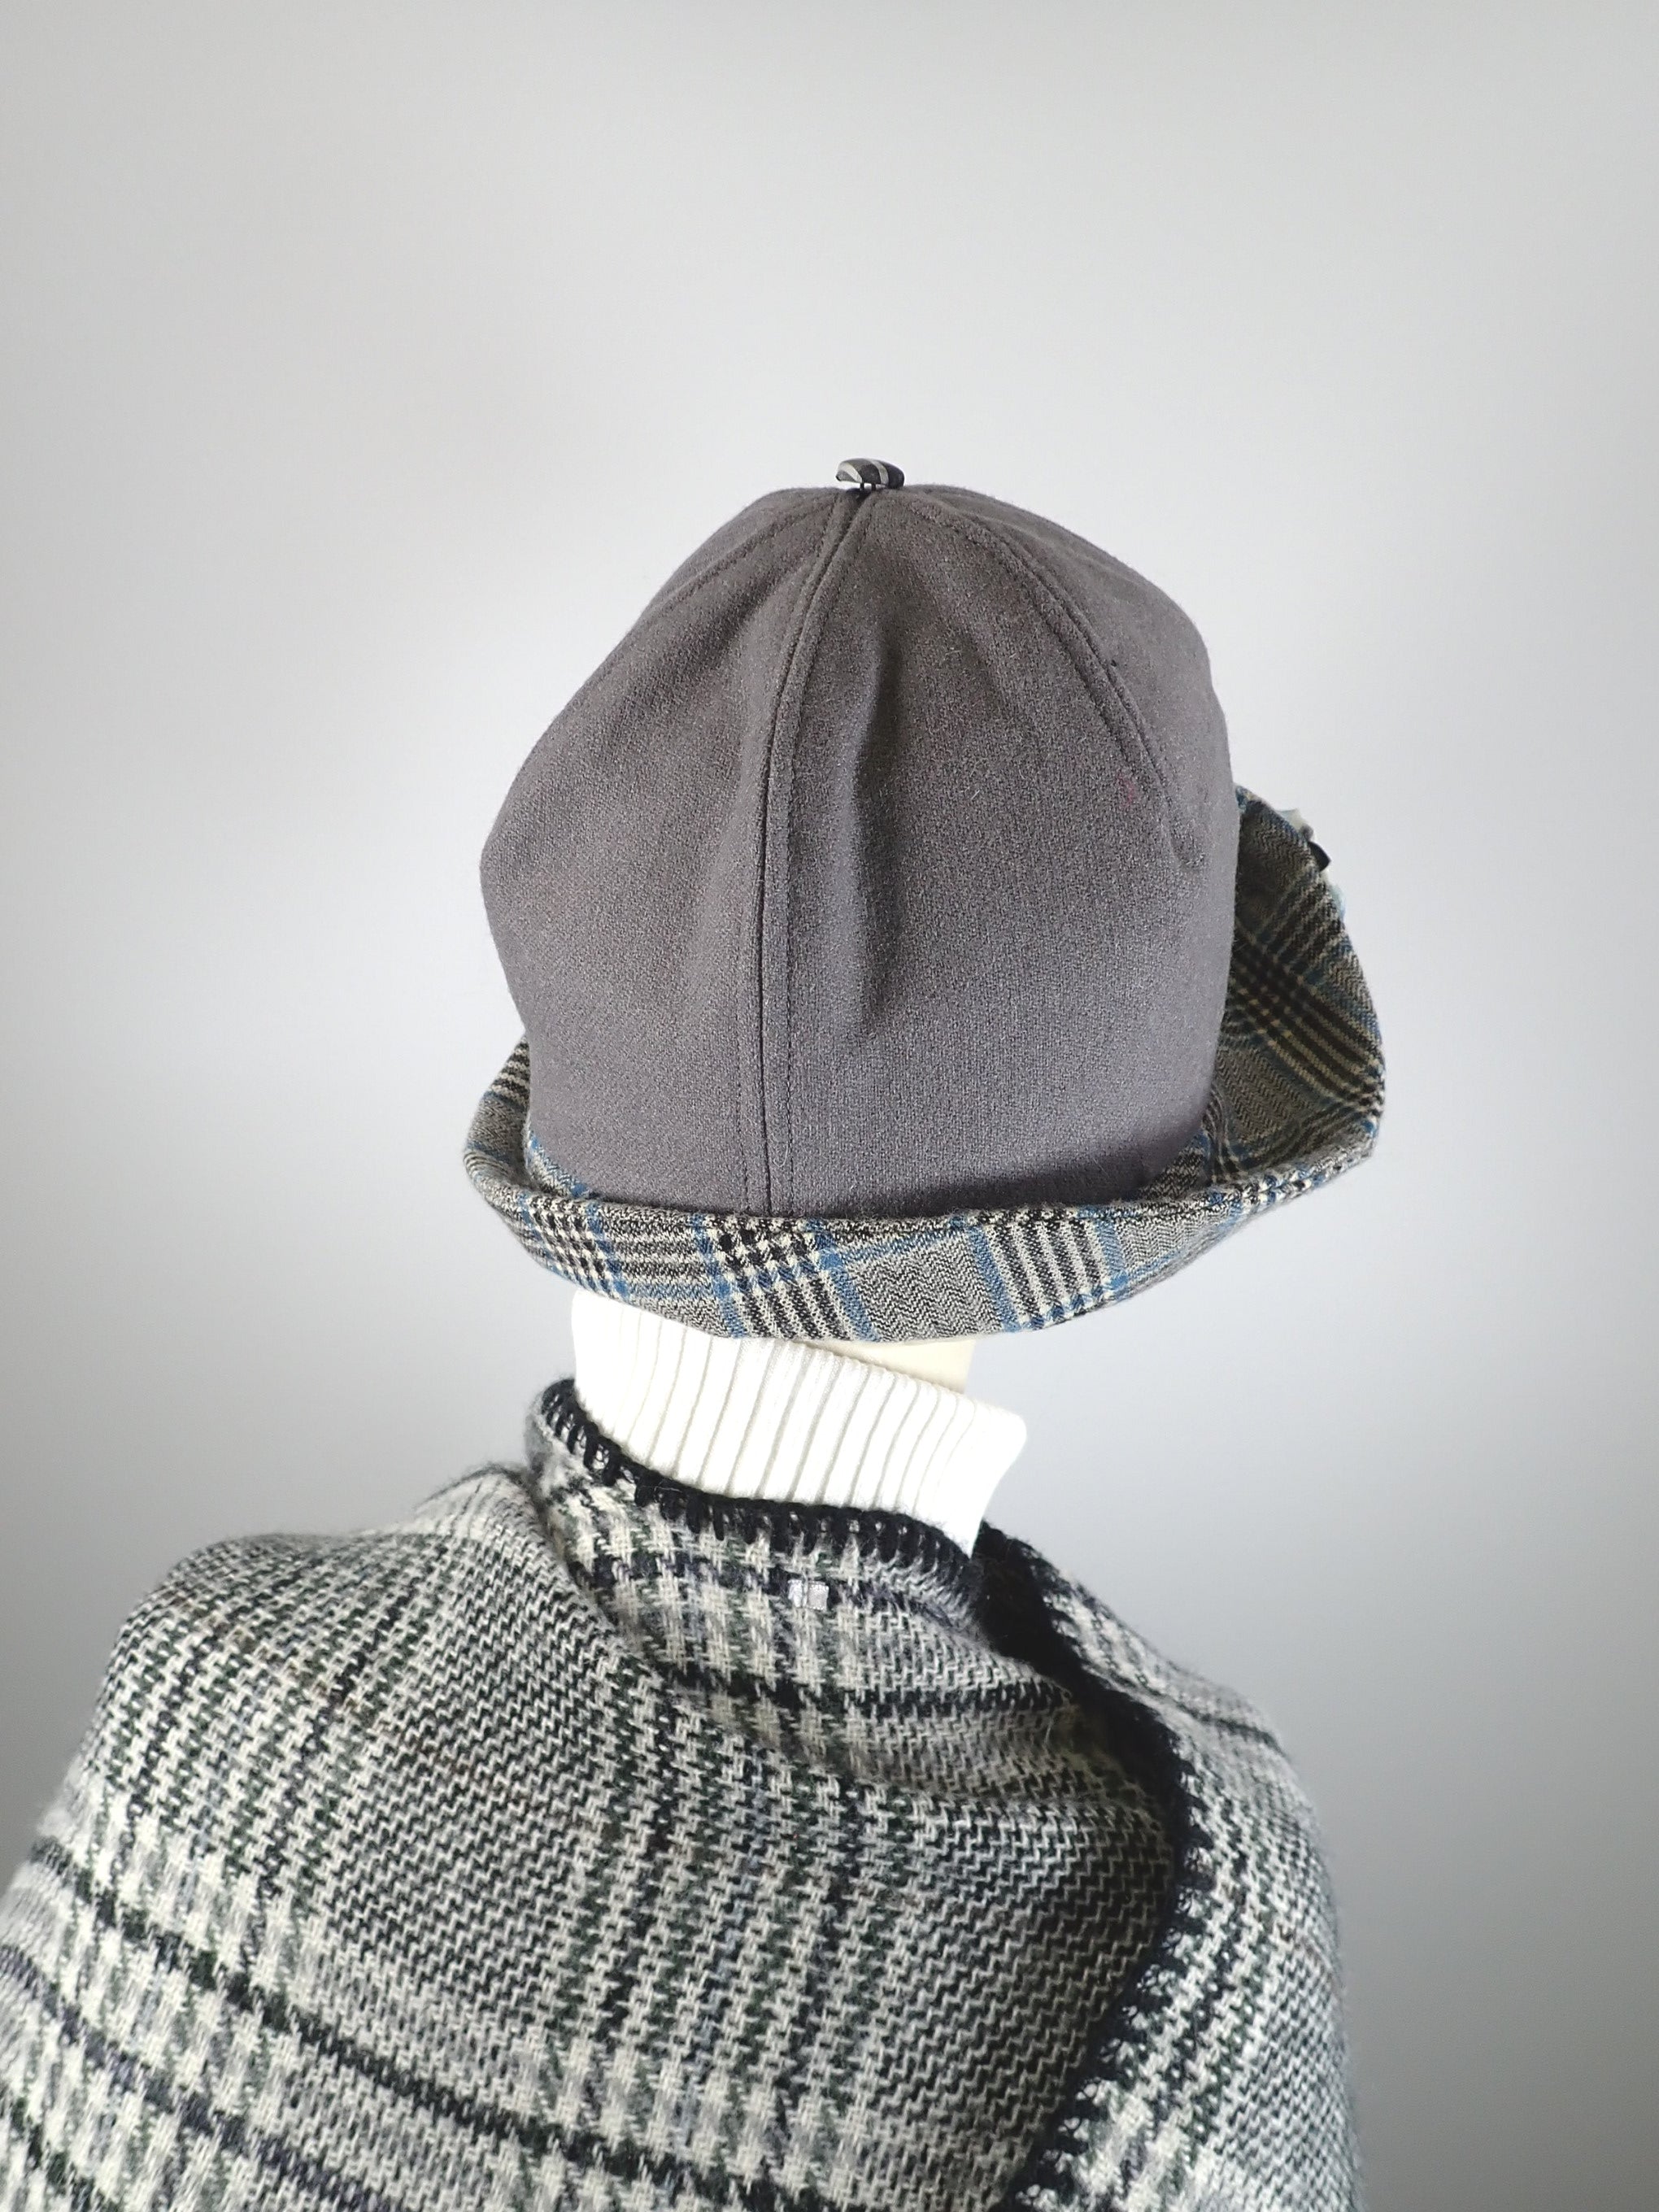 Womens Warm Winter Wool Cloche Hat. Ladies fabric Bucket Hat. 1920s flapper hat. Slow fashion. Gray, blue and white hat. Great Gatsby hat